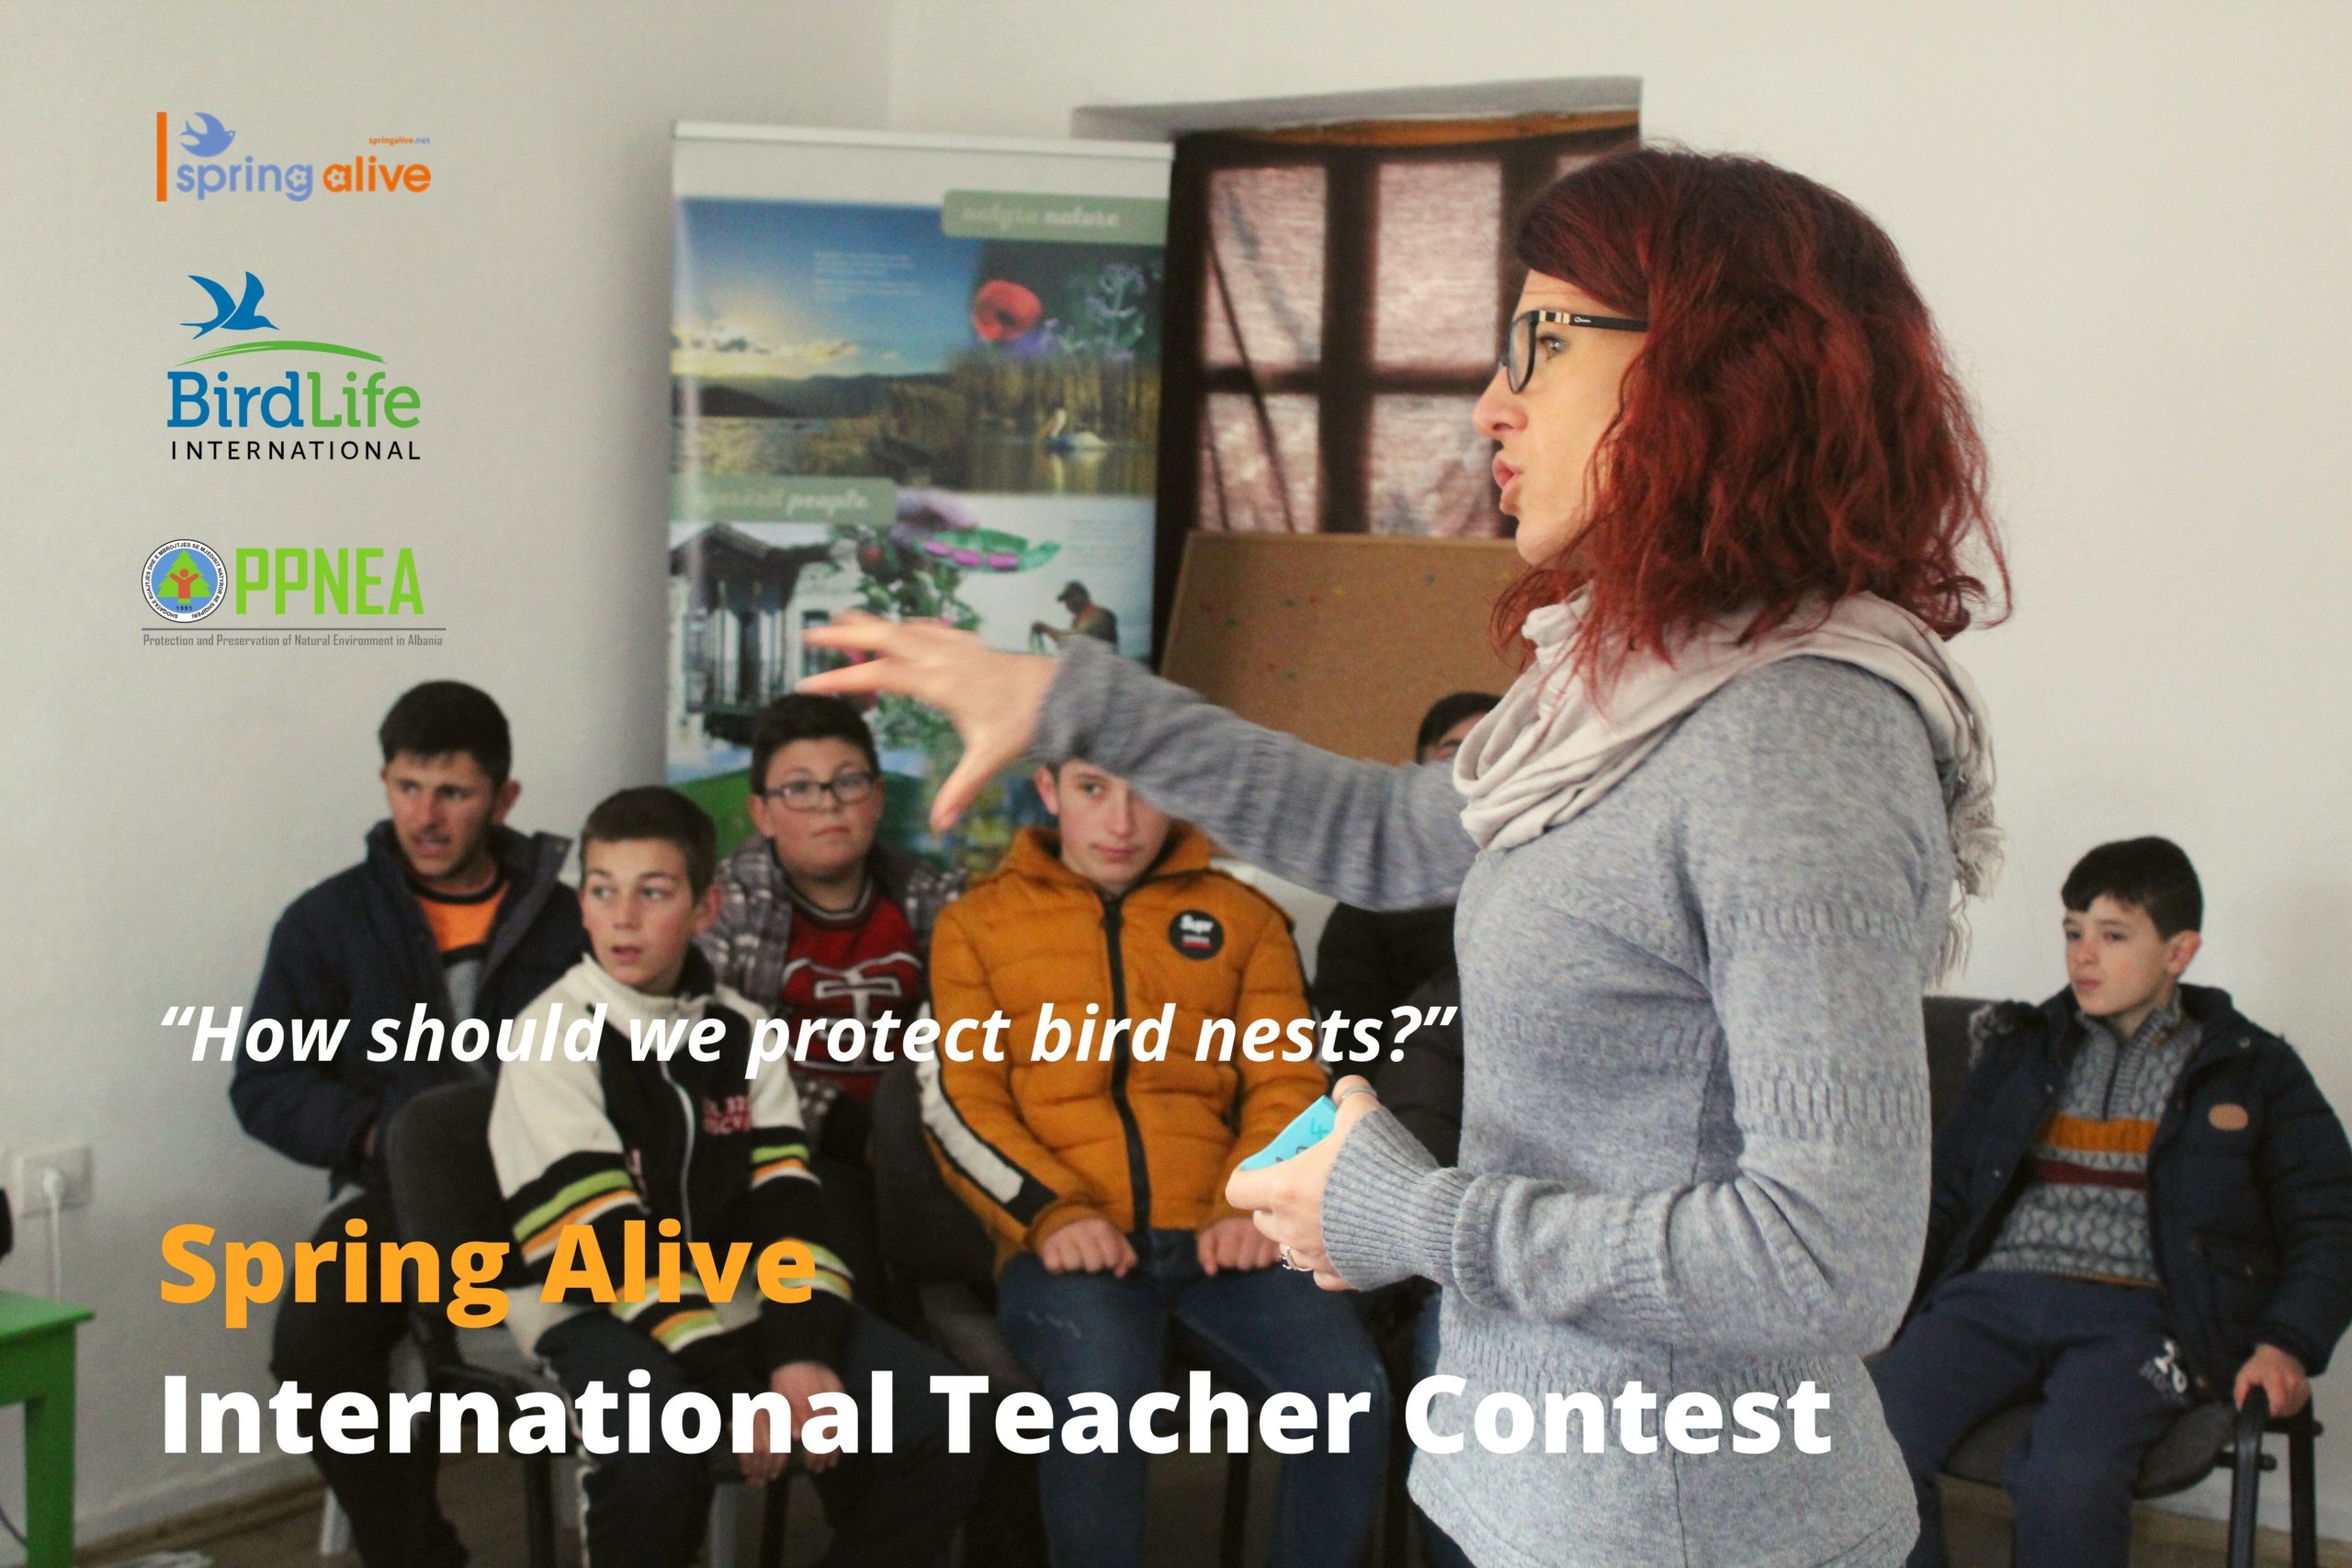 Rules of the Teacher Contest “How should we protect bird nests?”